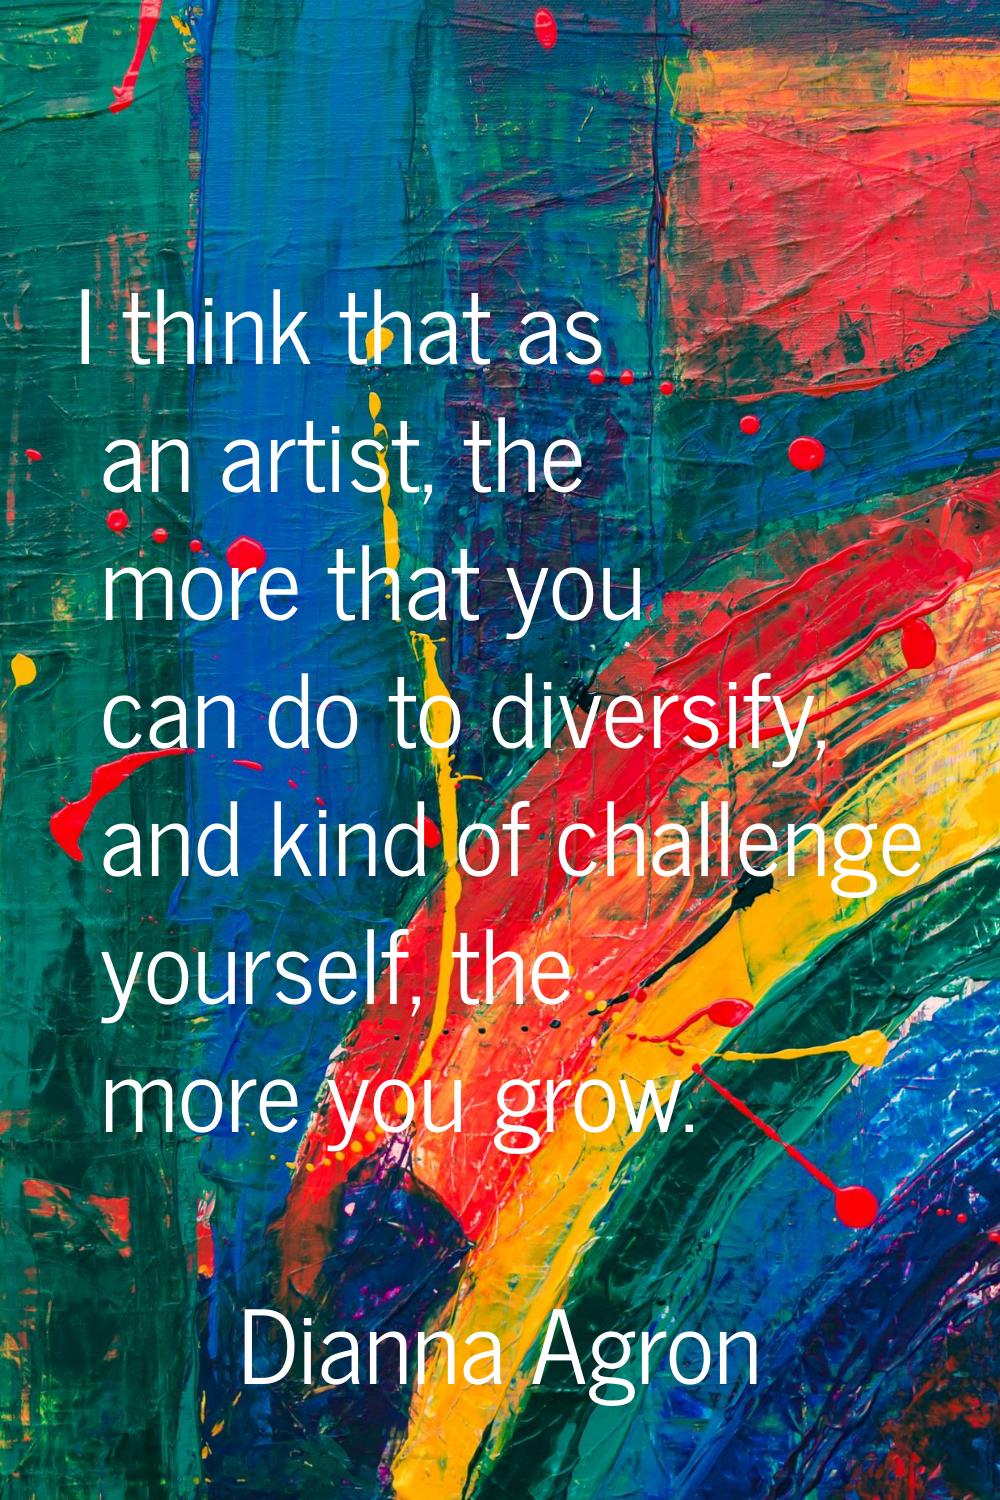 I think that as an artist, the more that you can do to diversify, and kind of challenge yourself, t